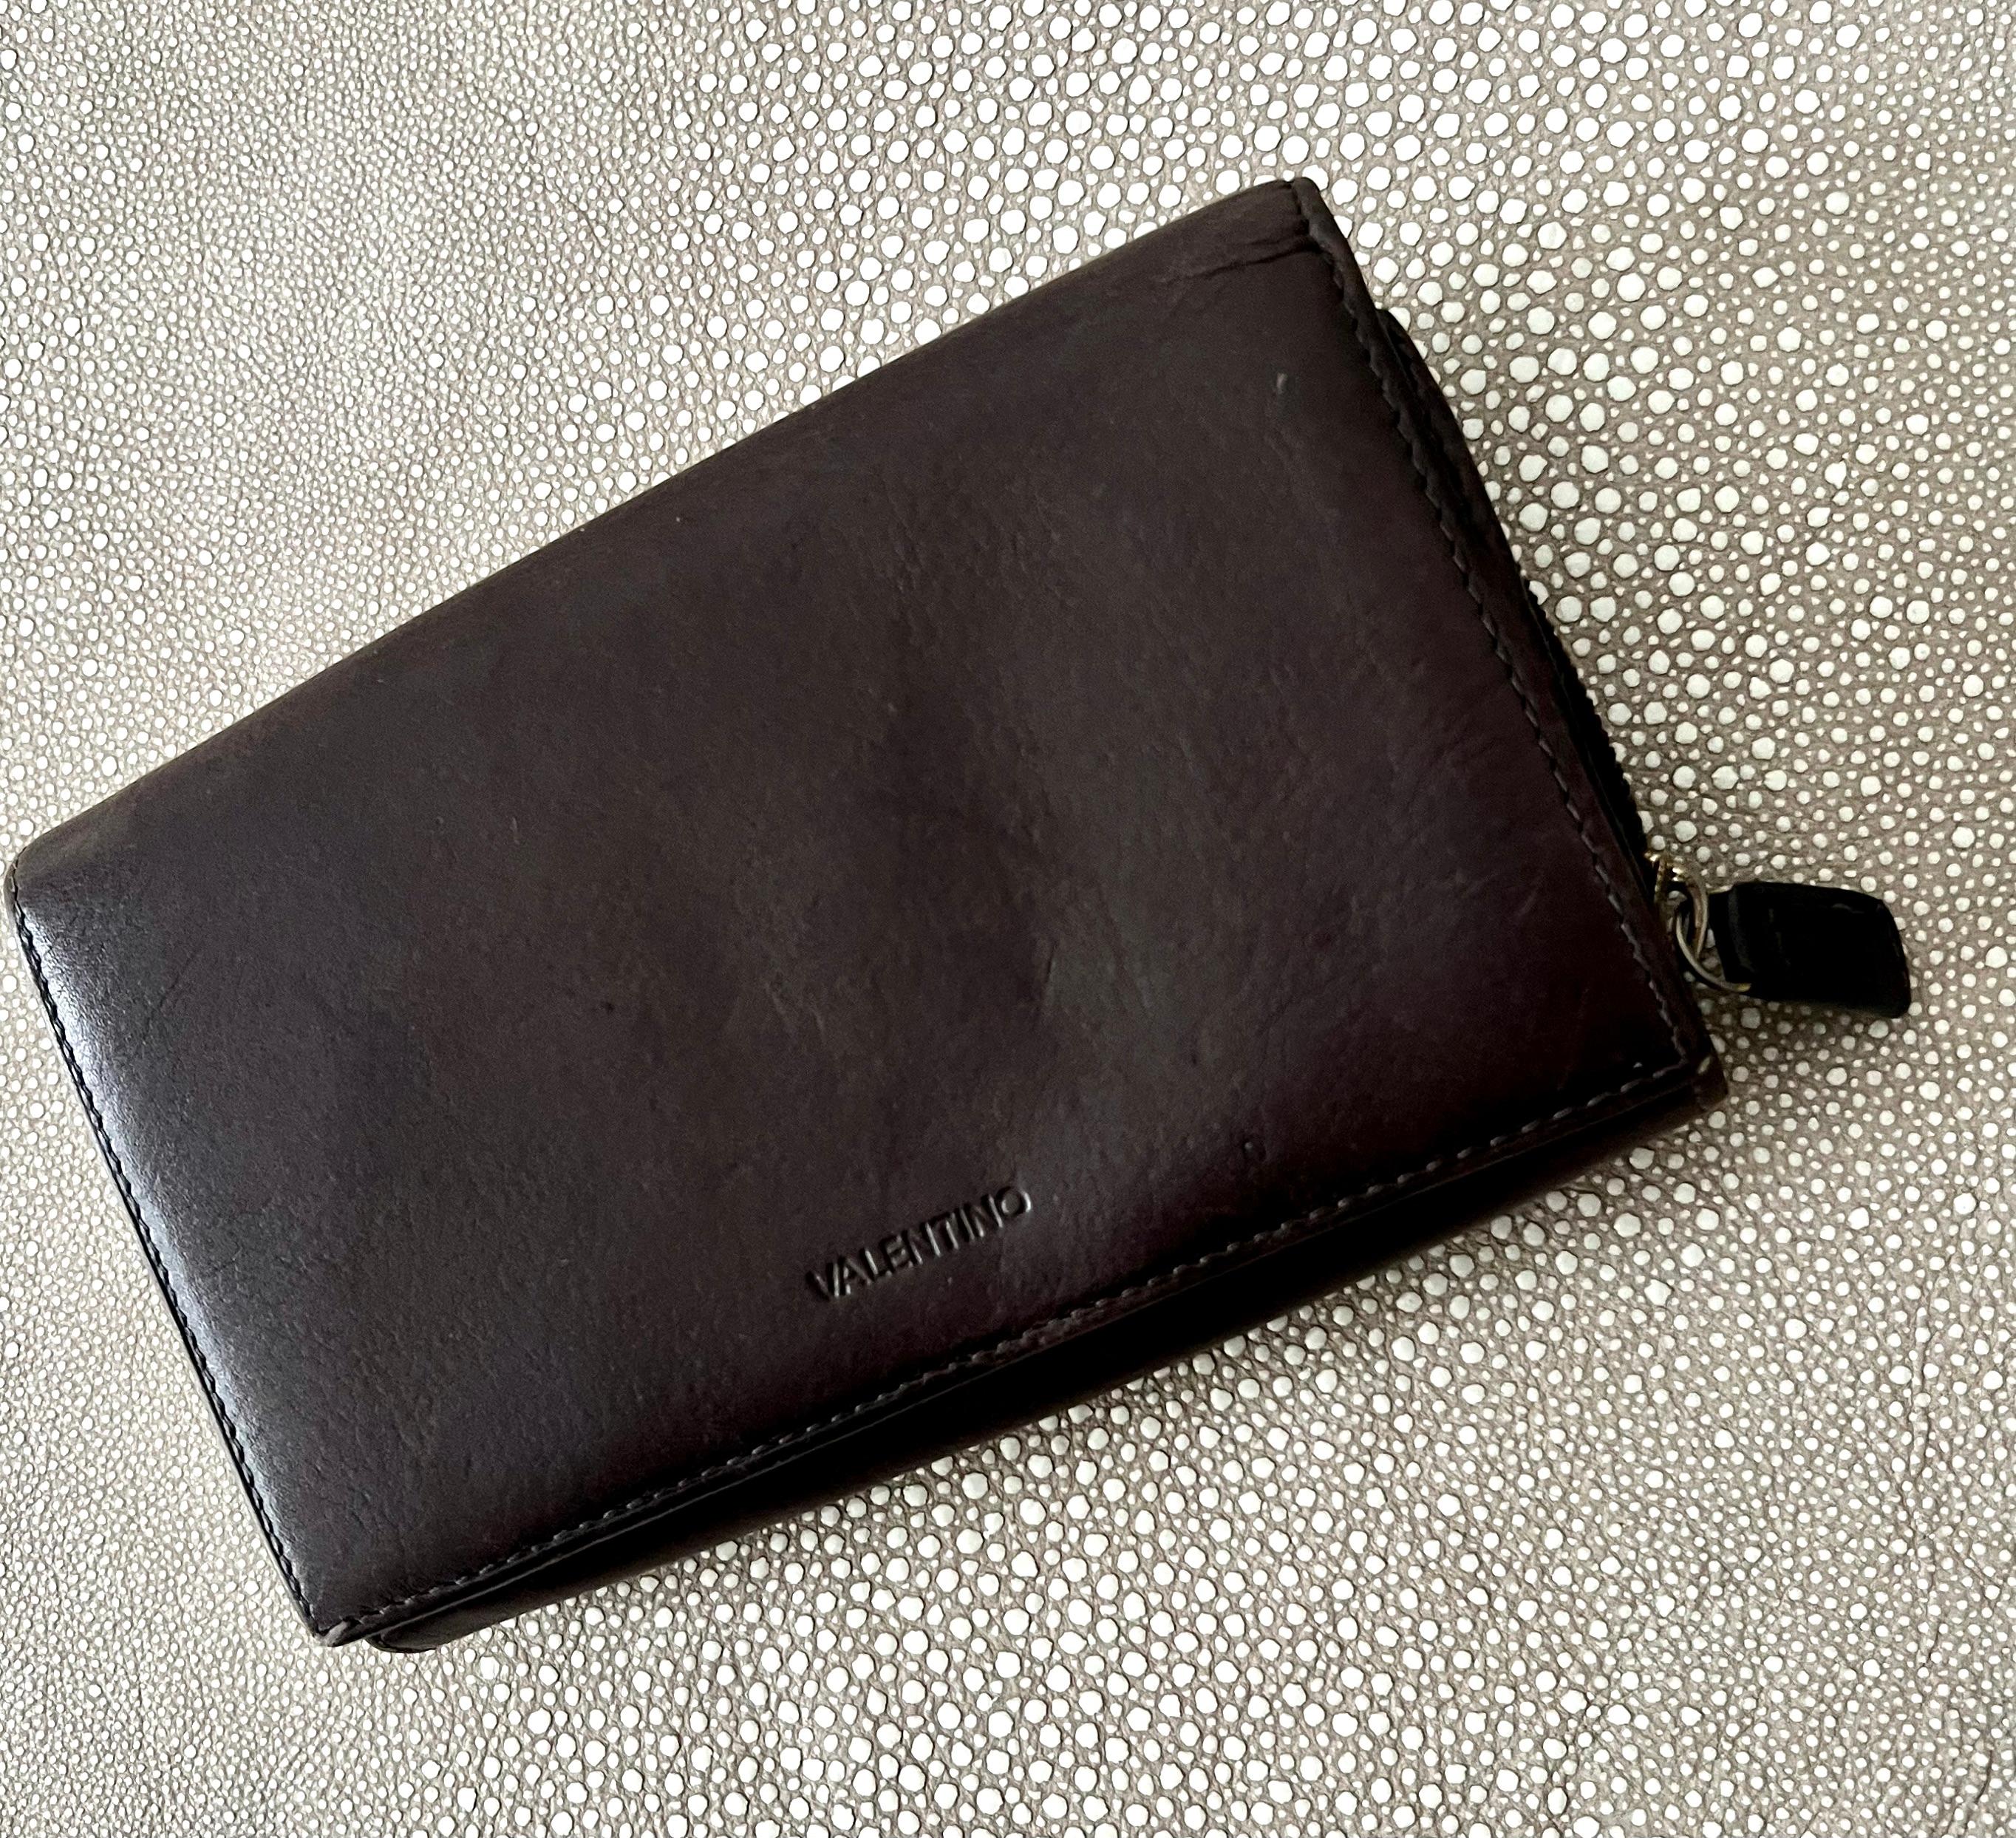 Valentino Italian Duo Fold Leather Wallet For Sale 3